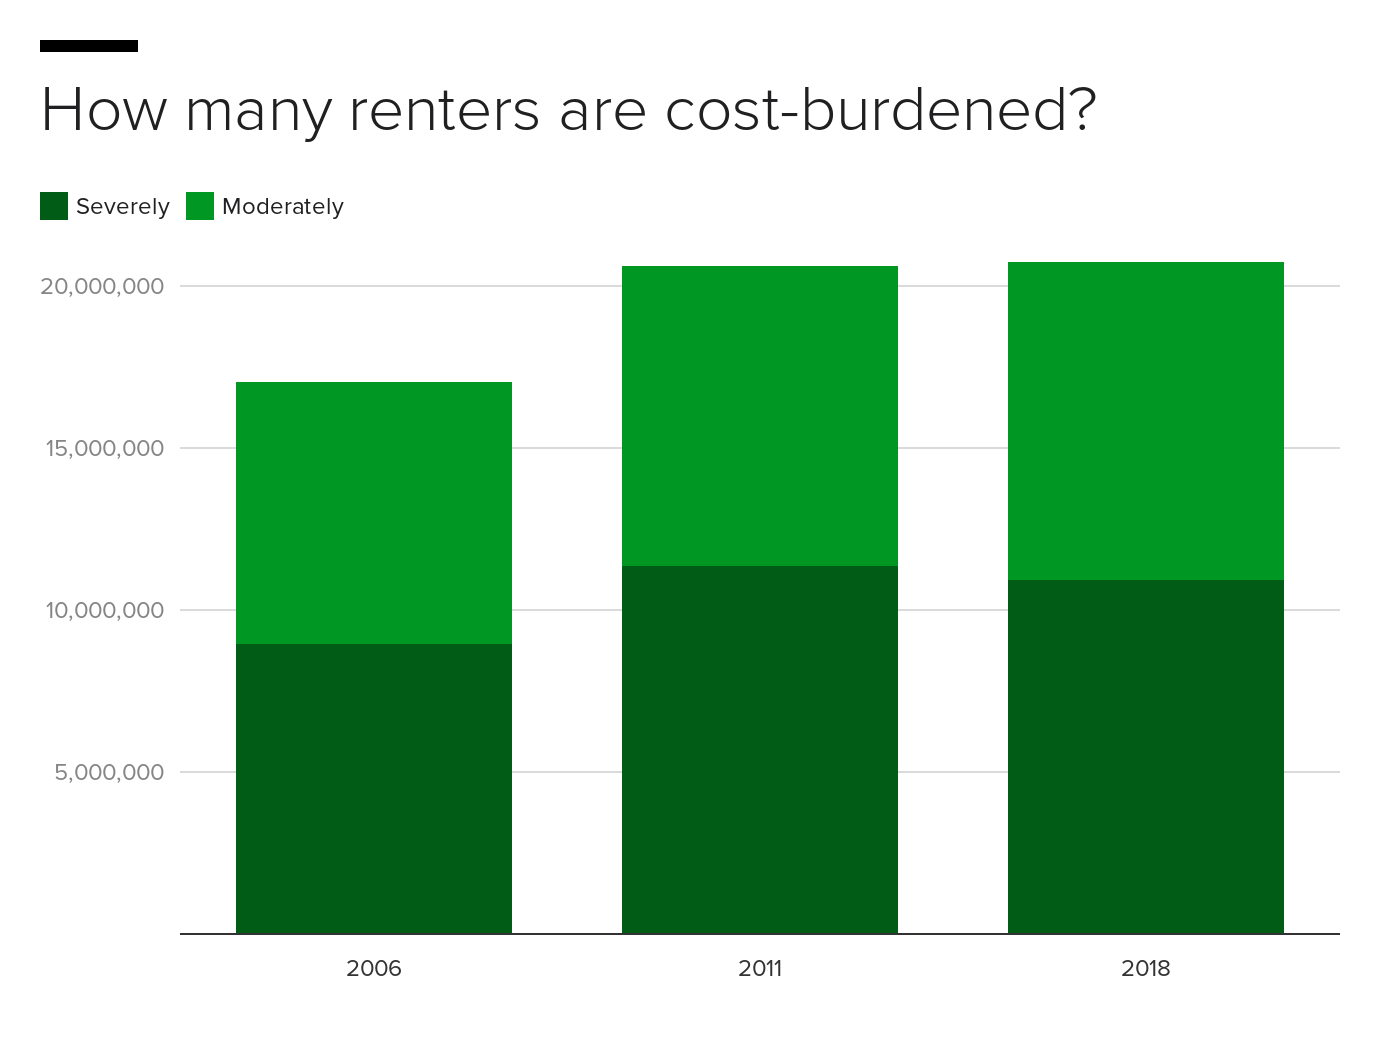 5dqnf-how-many-renters-are-cost-burdened.png 